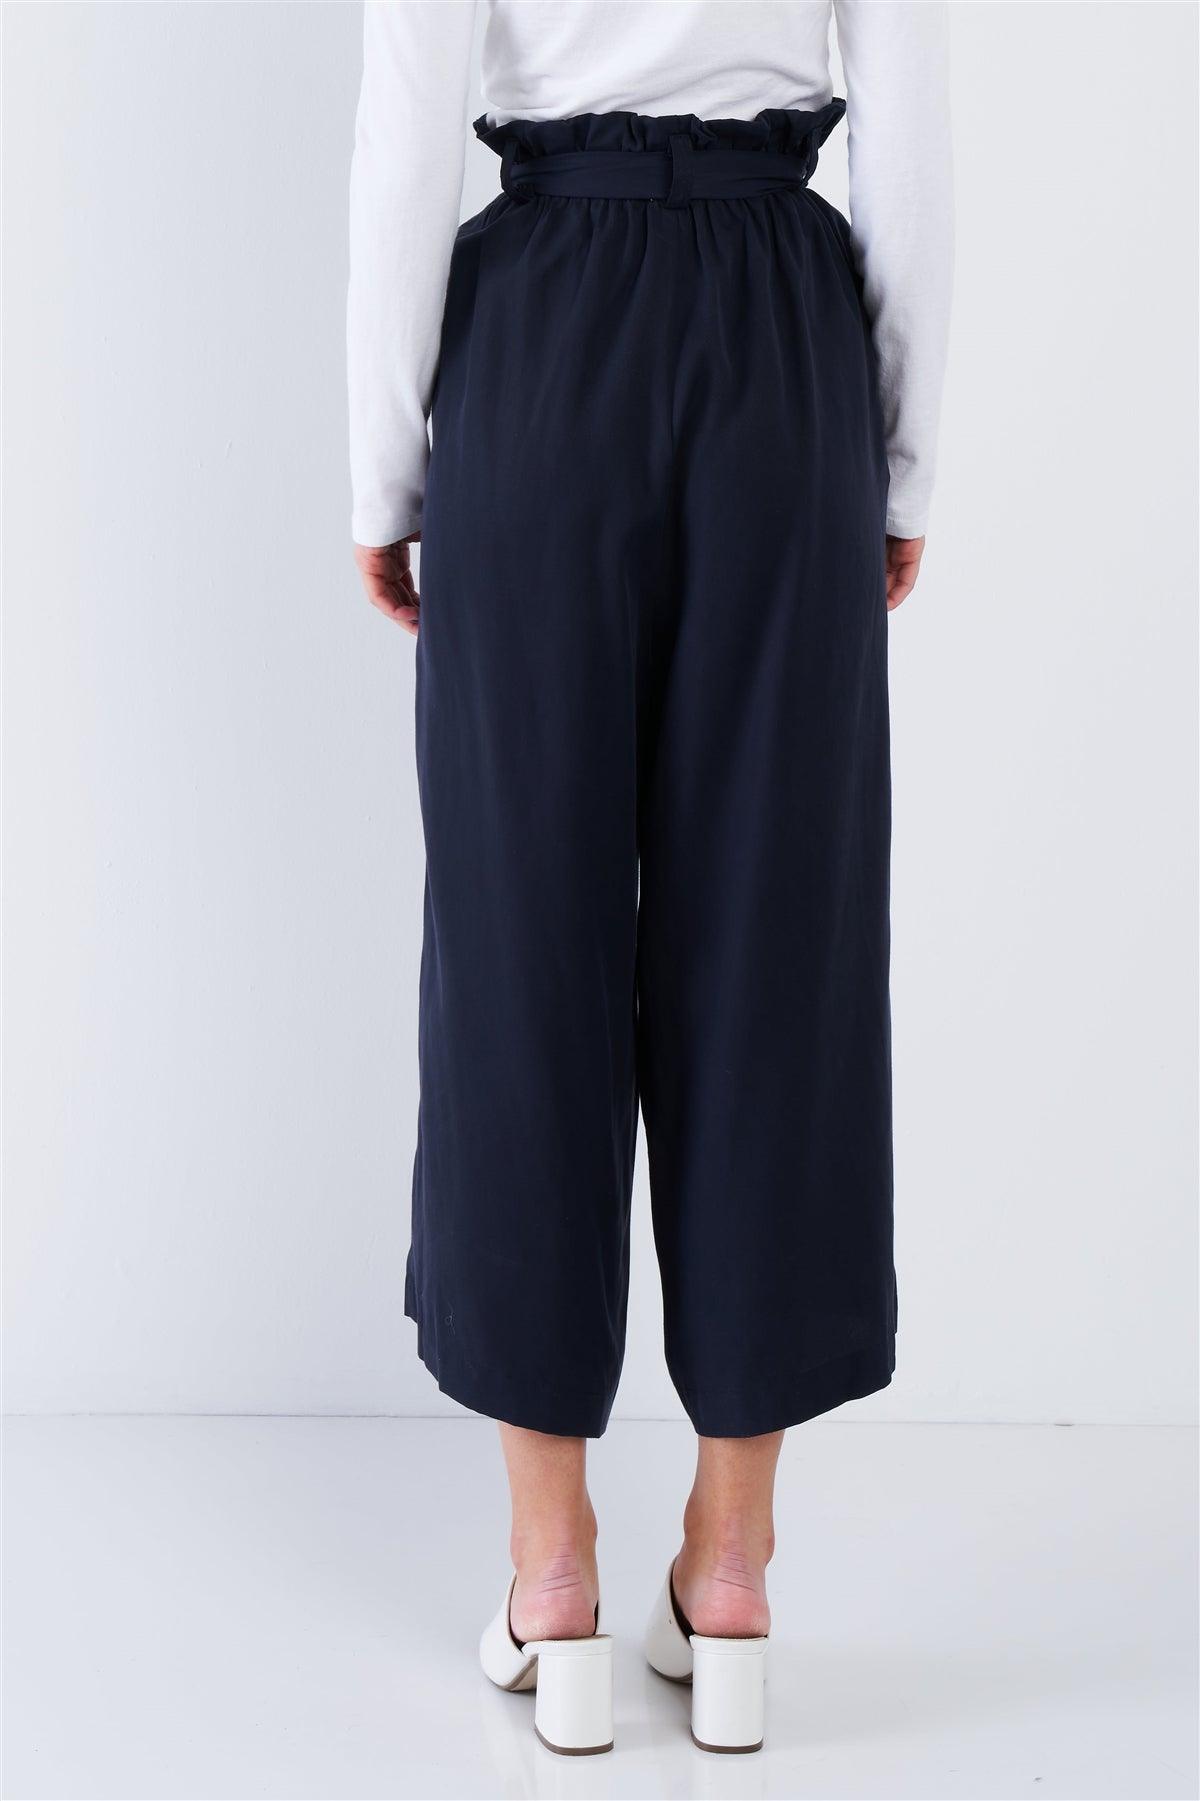 Navy High Waisted Wide Leg Office Chic Gaucho Pants  /3-2-1